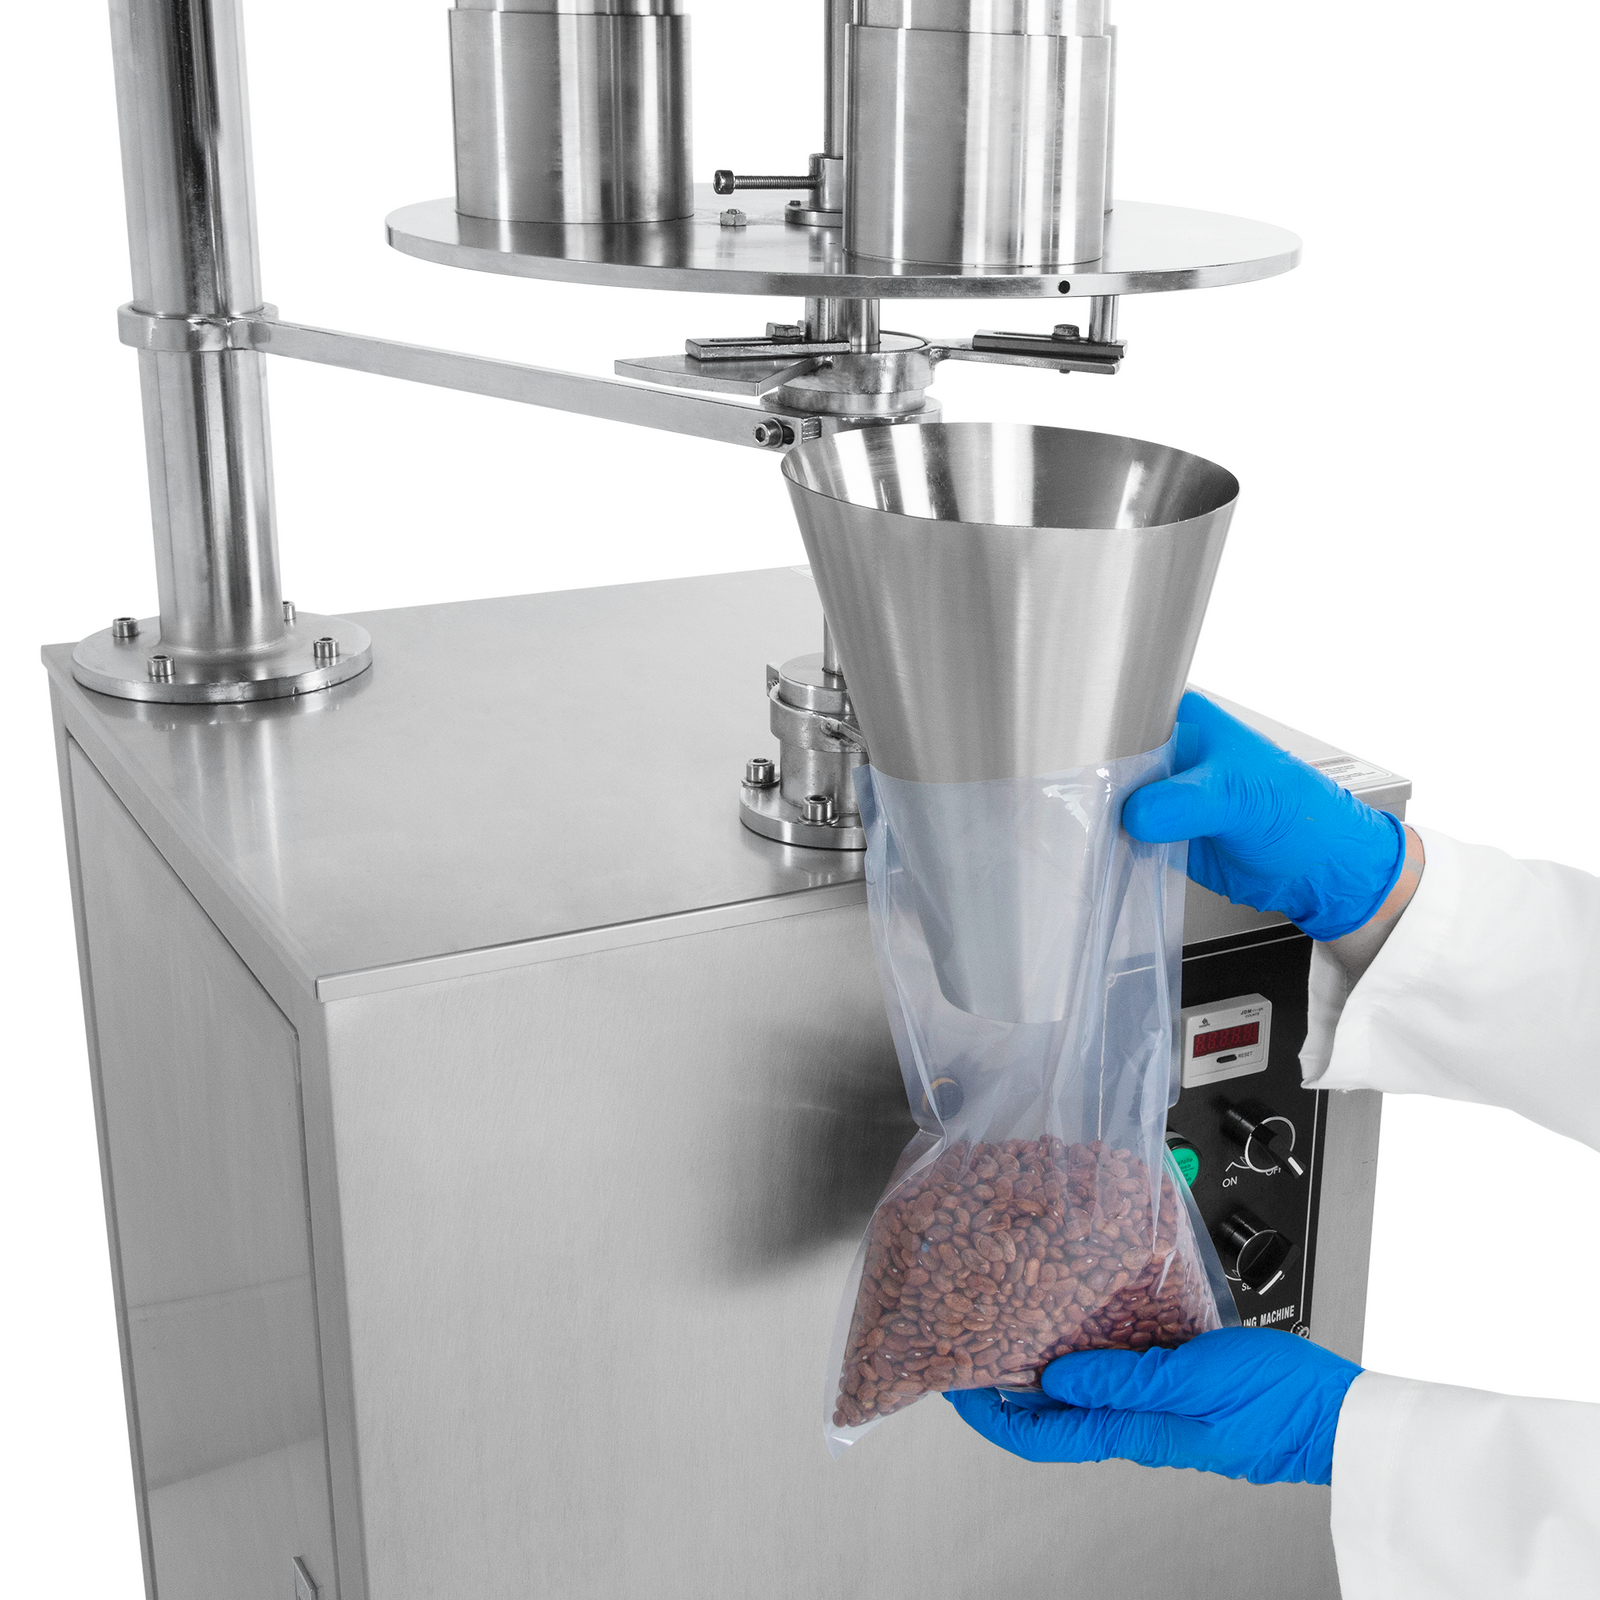 Close-up of the hands of a person holding a clear plastic bag under the dispensing cone of the semi automatic volumetric filler while it releases 500ml of free-flowing product with accuracy into the bag